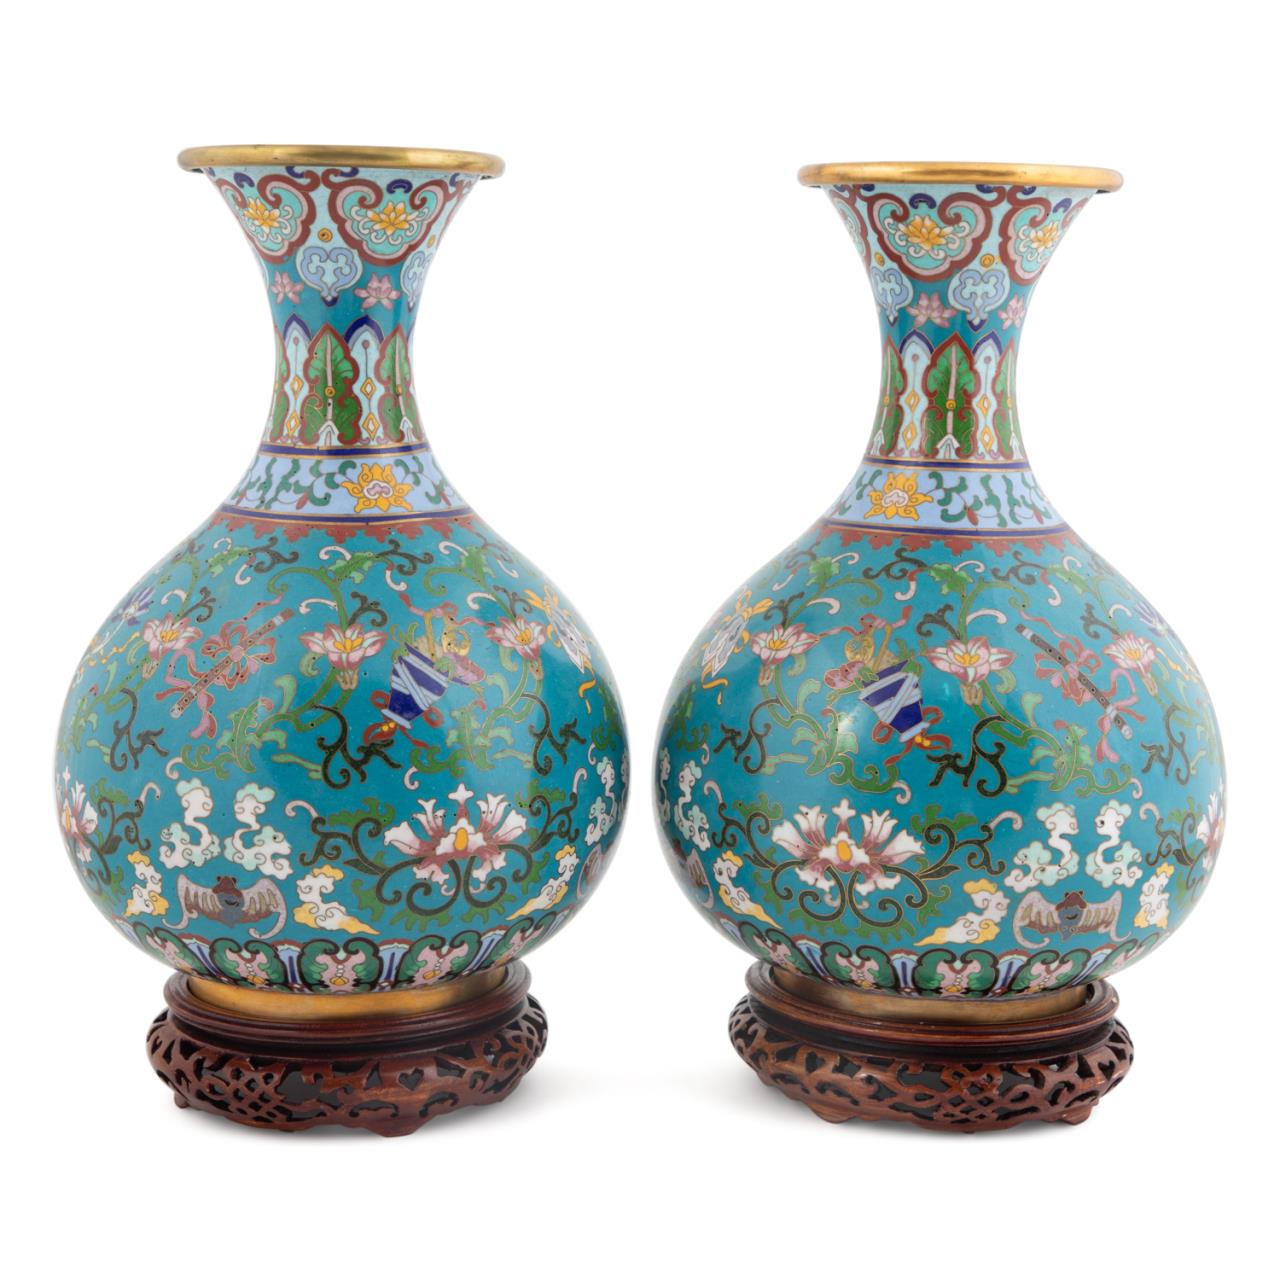 PAIR CHINESE CLOISONNE VASES ON 2bfb7d